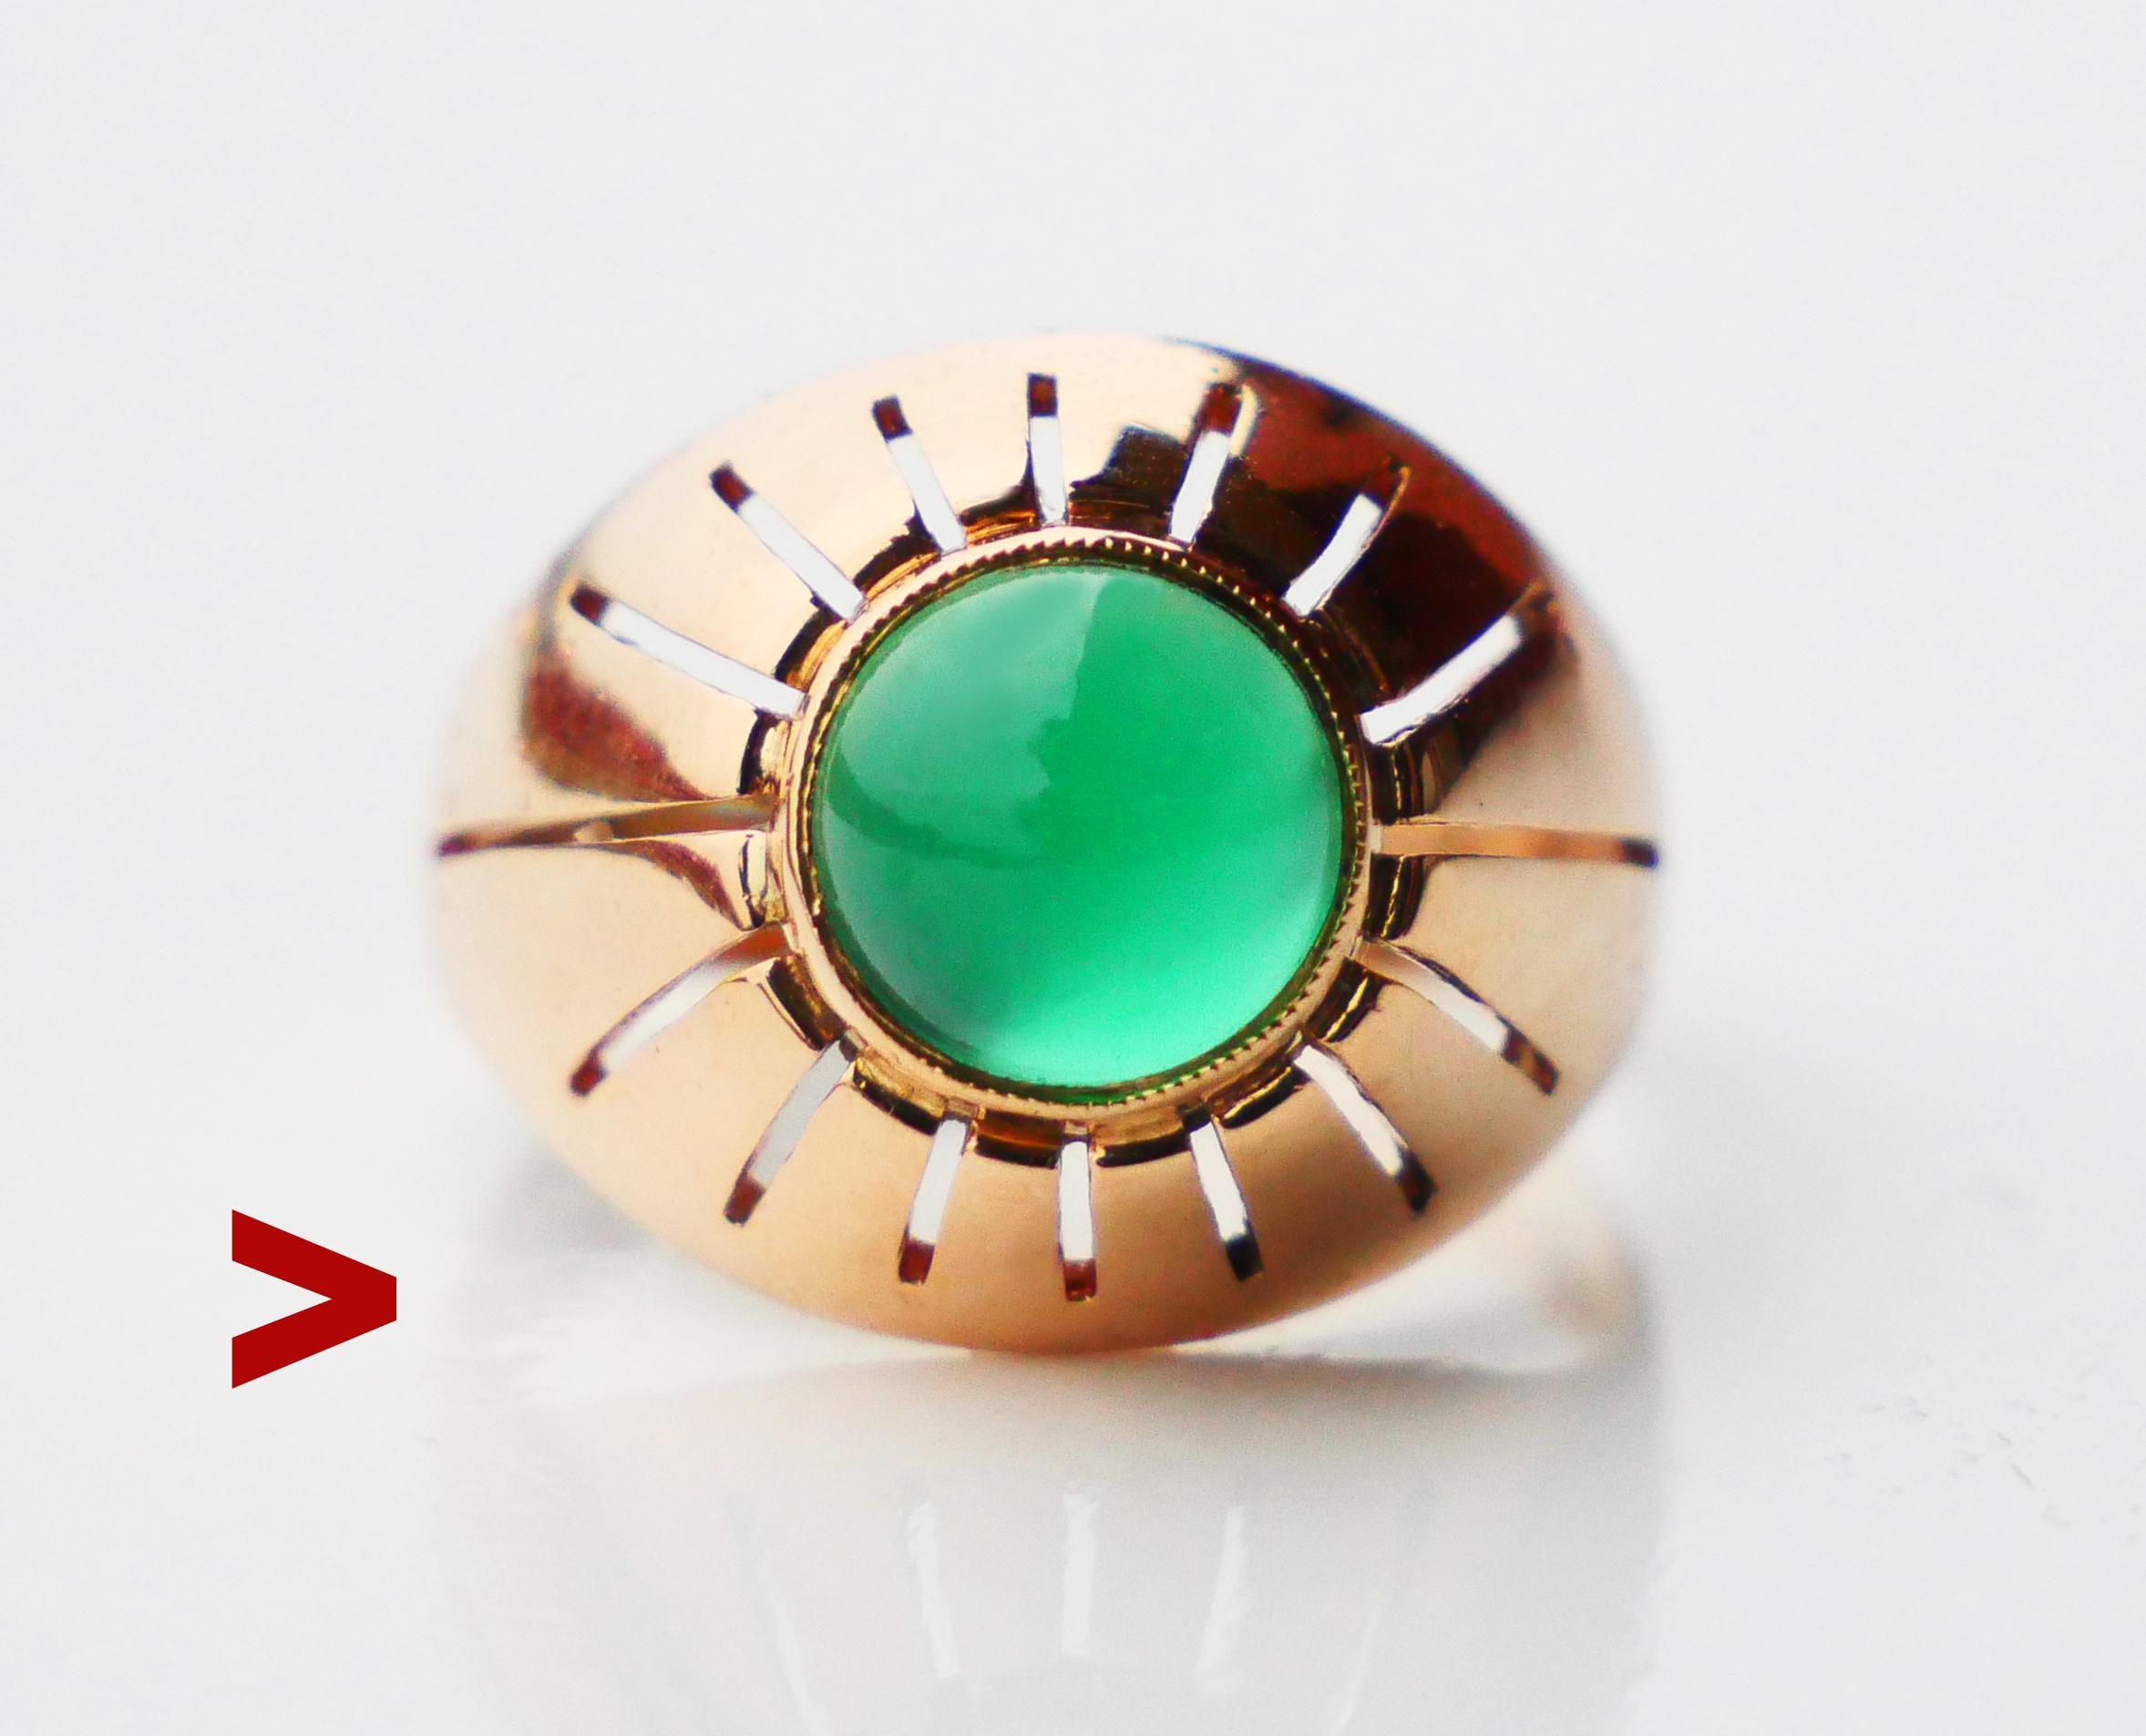 Ring for Men or Women in solid 18K Yellow /Yellow Gold with bezel set polished cabochon of natural Dark Green Chalcedony stone Ø 7.5 mm x 5 mm deep /ca. 2.5 ct. This stone is rather hard, durable, and wear-resistant with the natural hardness of 7